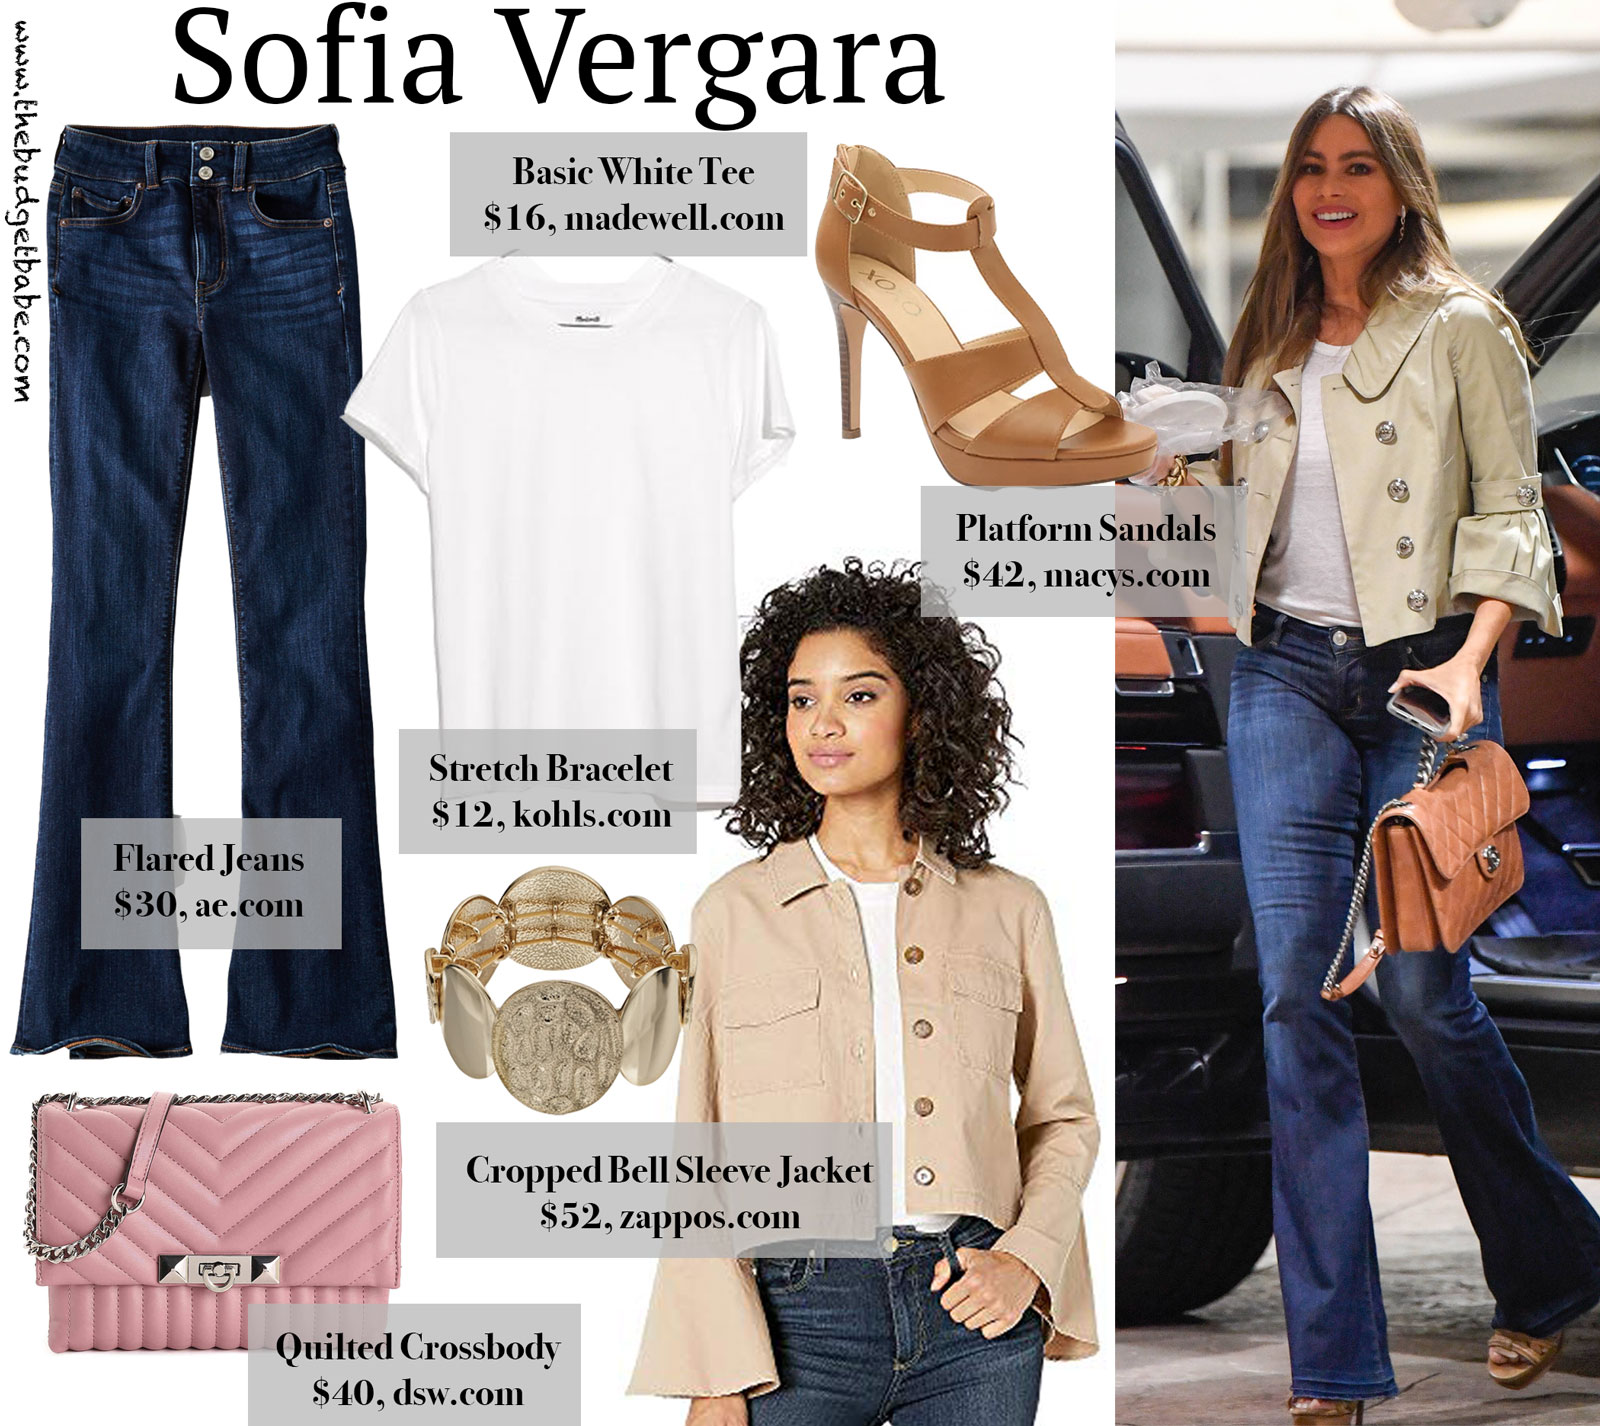 Sofia Vergara Cropped Jacket Flare Jeans Look for Less